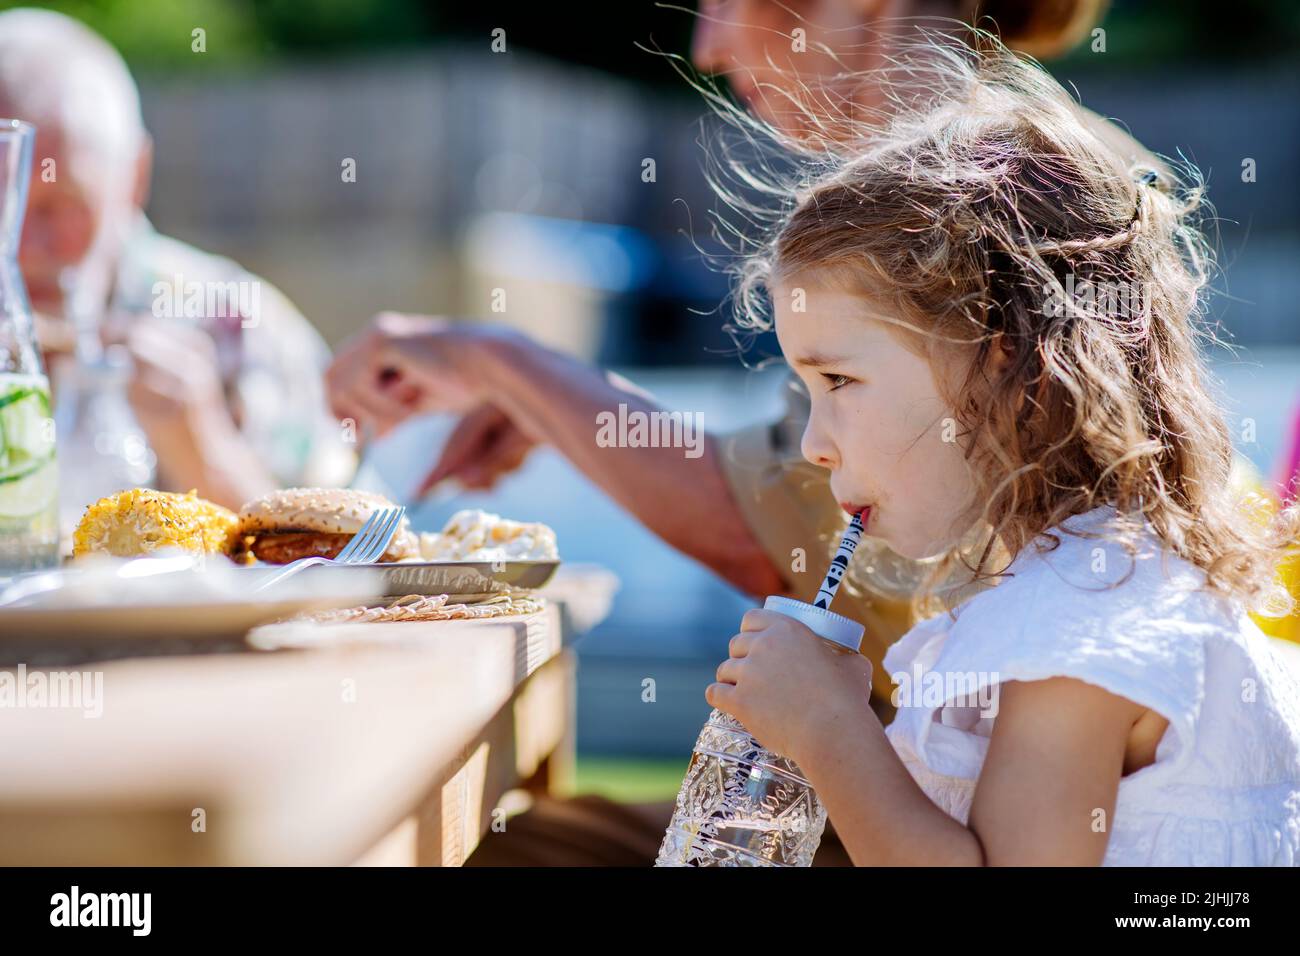 Family eating at barbecue party dinner in garden, little girl drinking water and enjoying it. Stock Photo